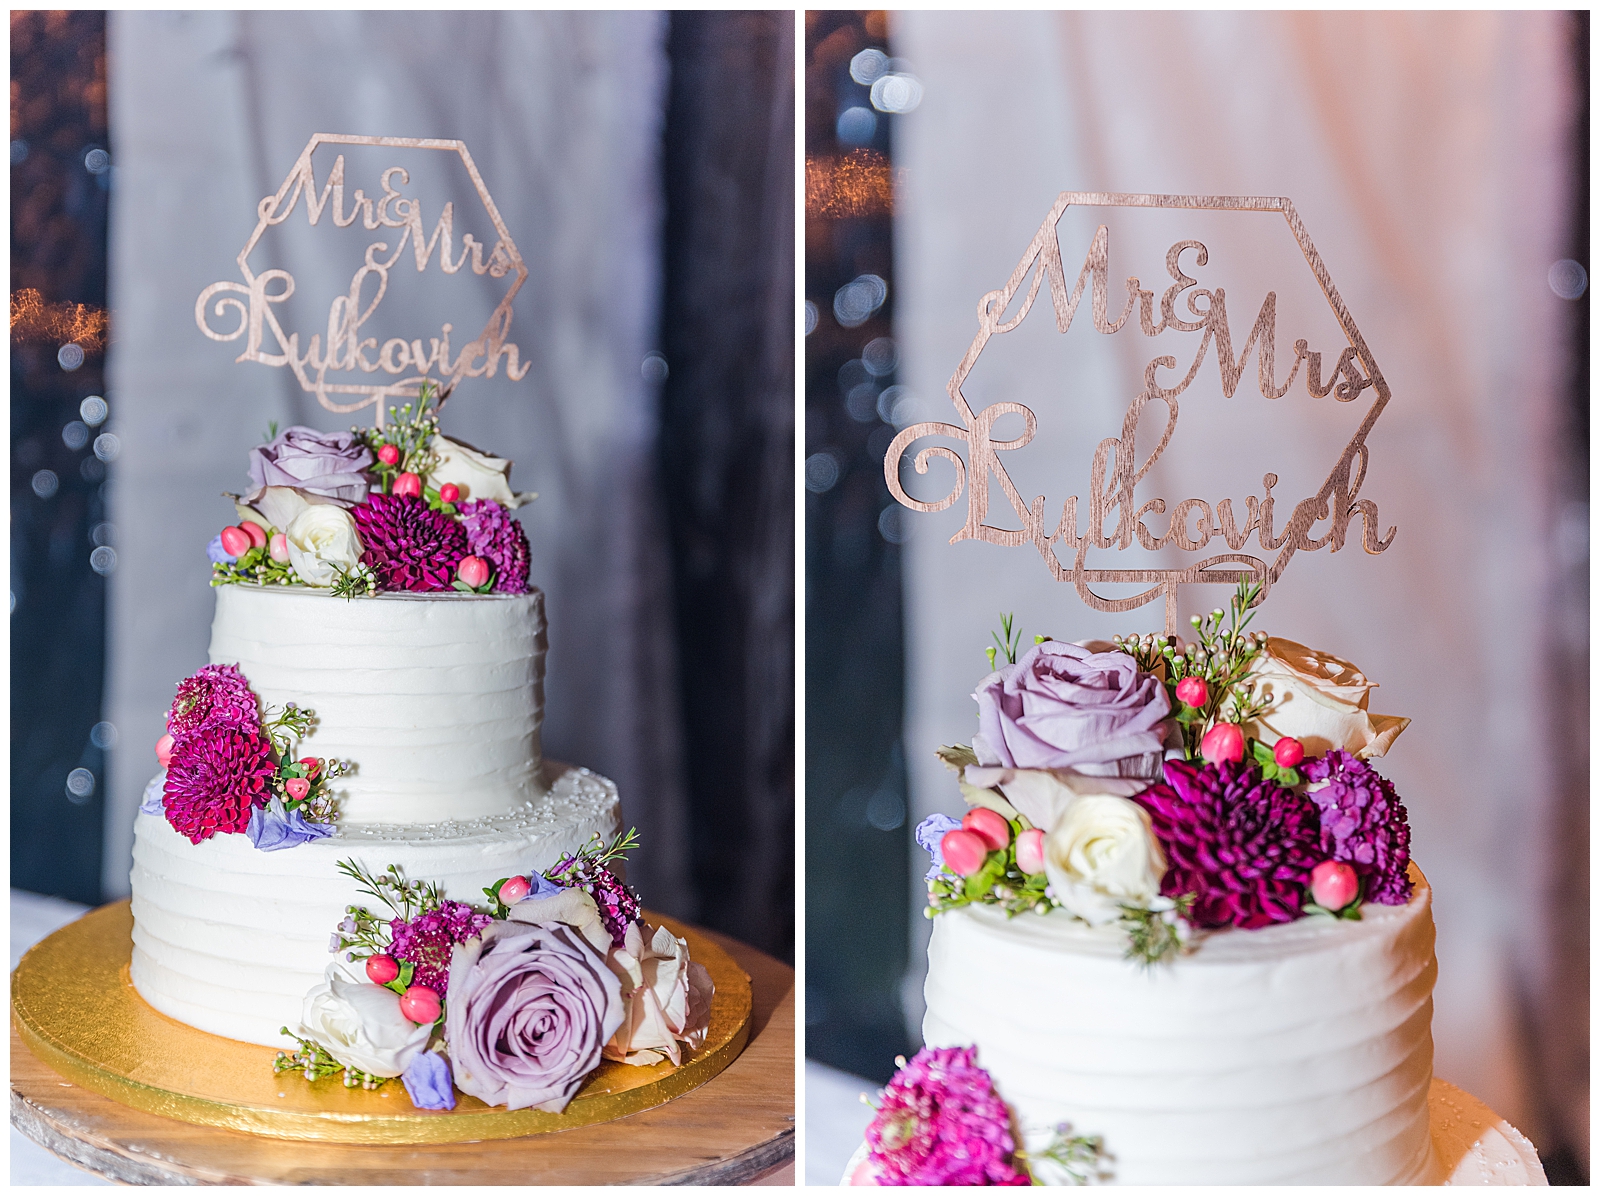 a white wedding cake with purple flowers on it